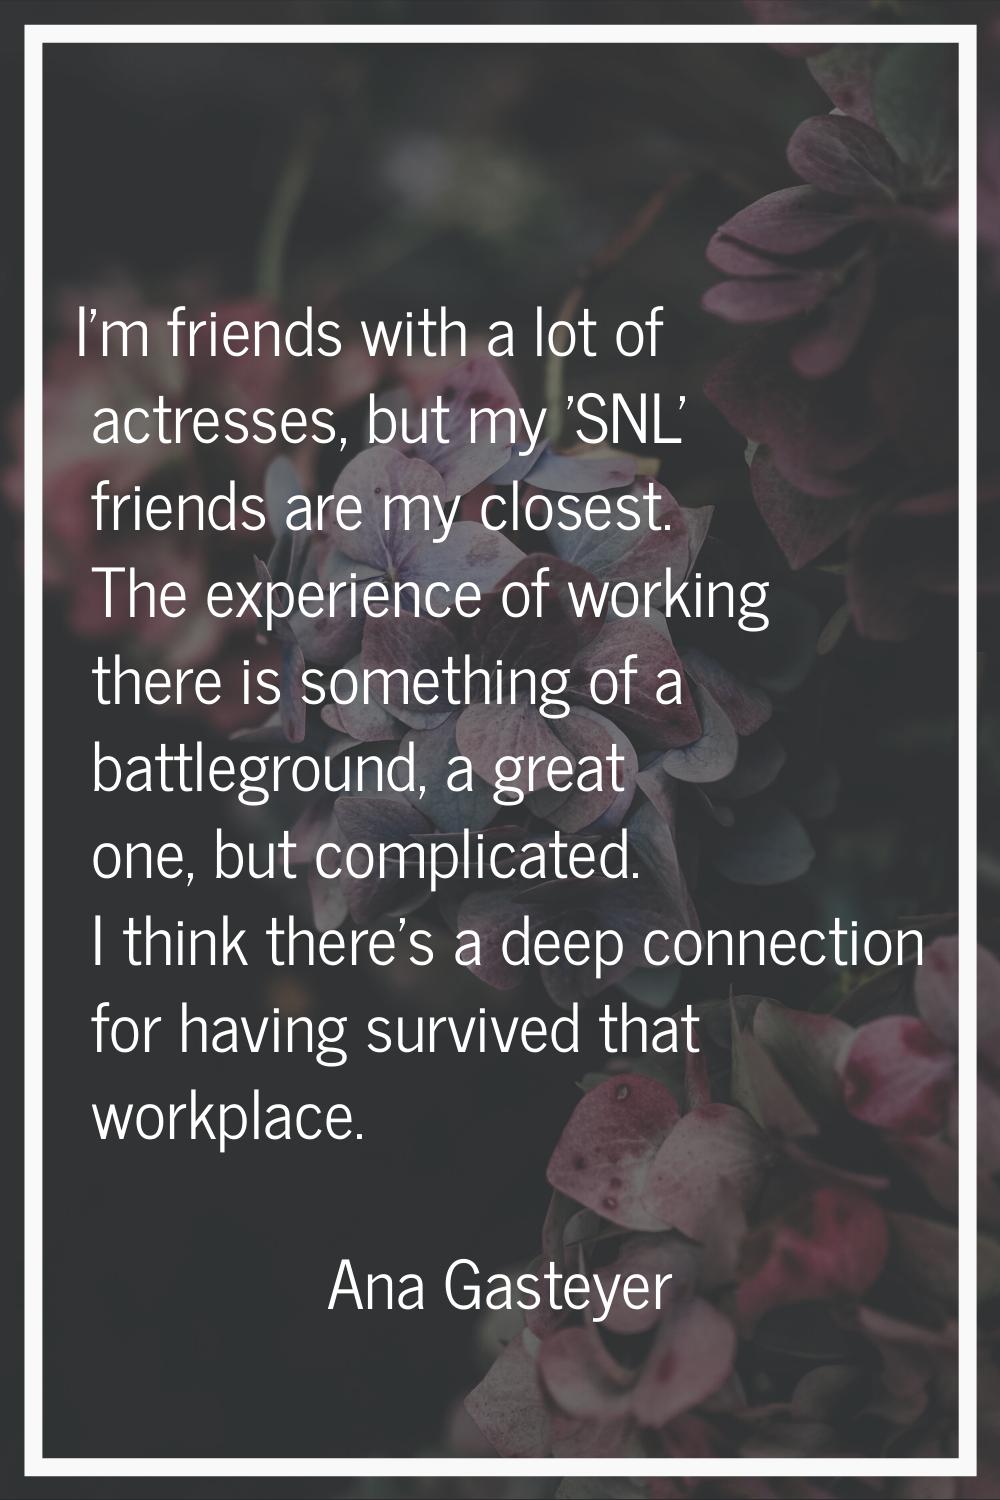 I'm friends with a lot of actresses, but my 'SNL' friends are my closest. The experience of working